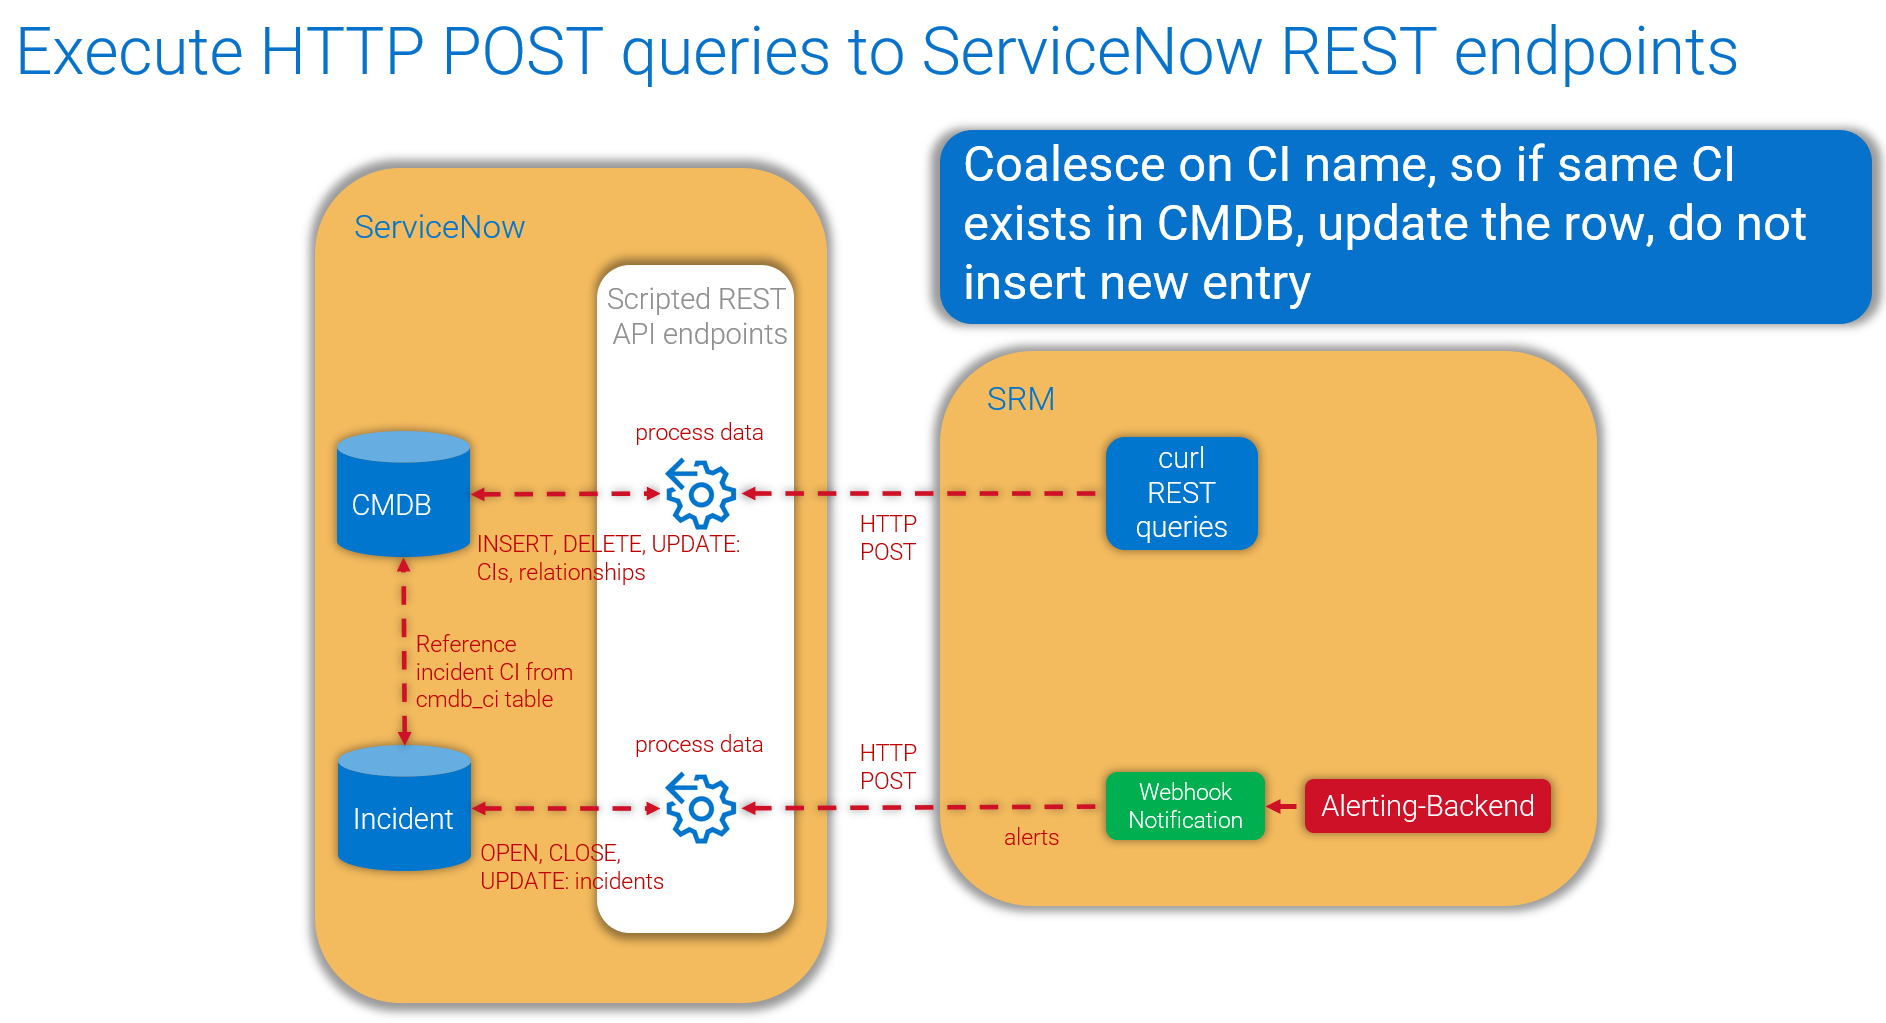 This diagram shows how to execute HTTP POST queries to ServiceNow REST endpoints. 